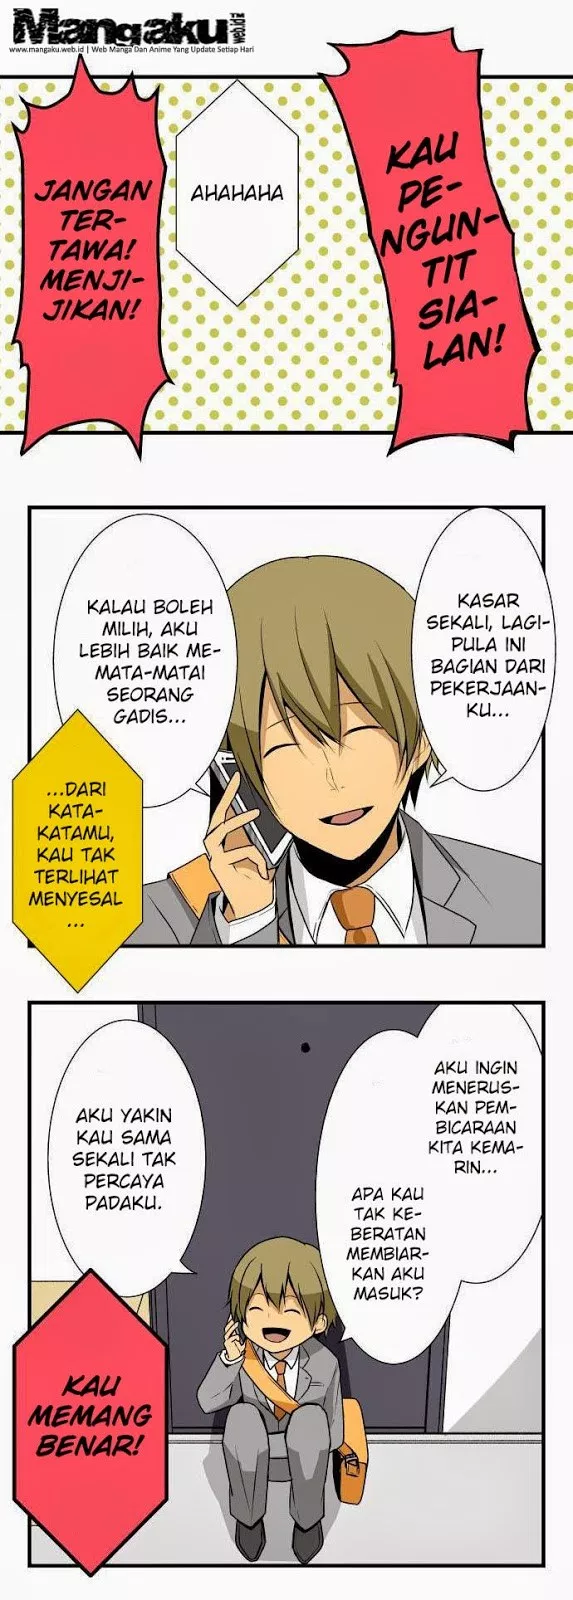 ReLIFE Chapter 4